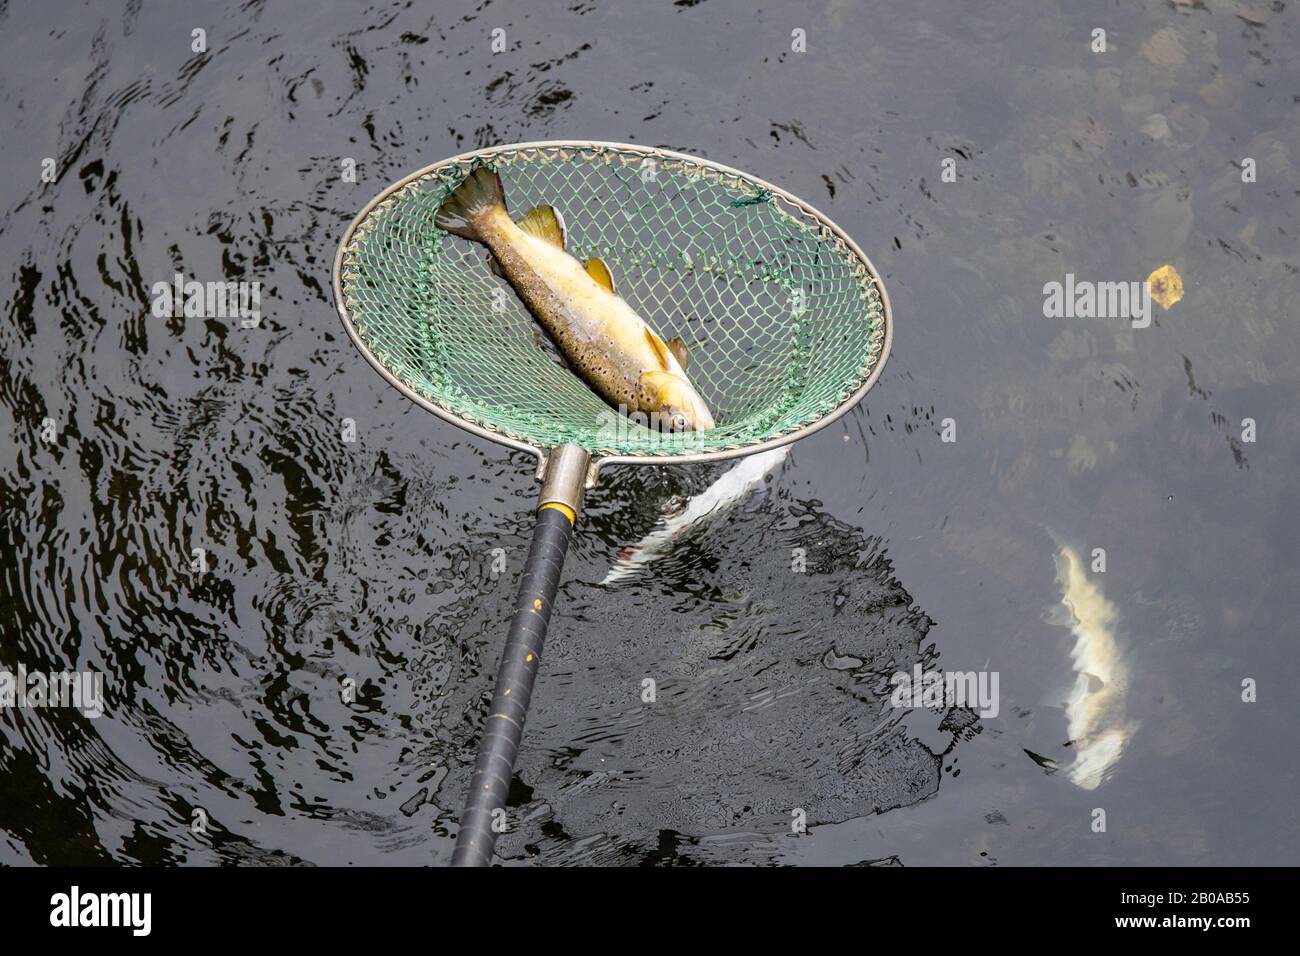 brown trout, river trout, brook trout (Salmo trutta fario), autochthonous species, catch of spawners with electrical equipment, Germany, Bavaria Stock Photo